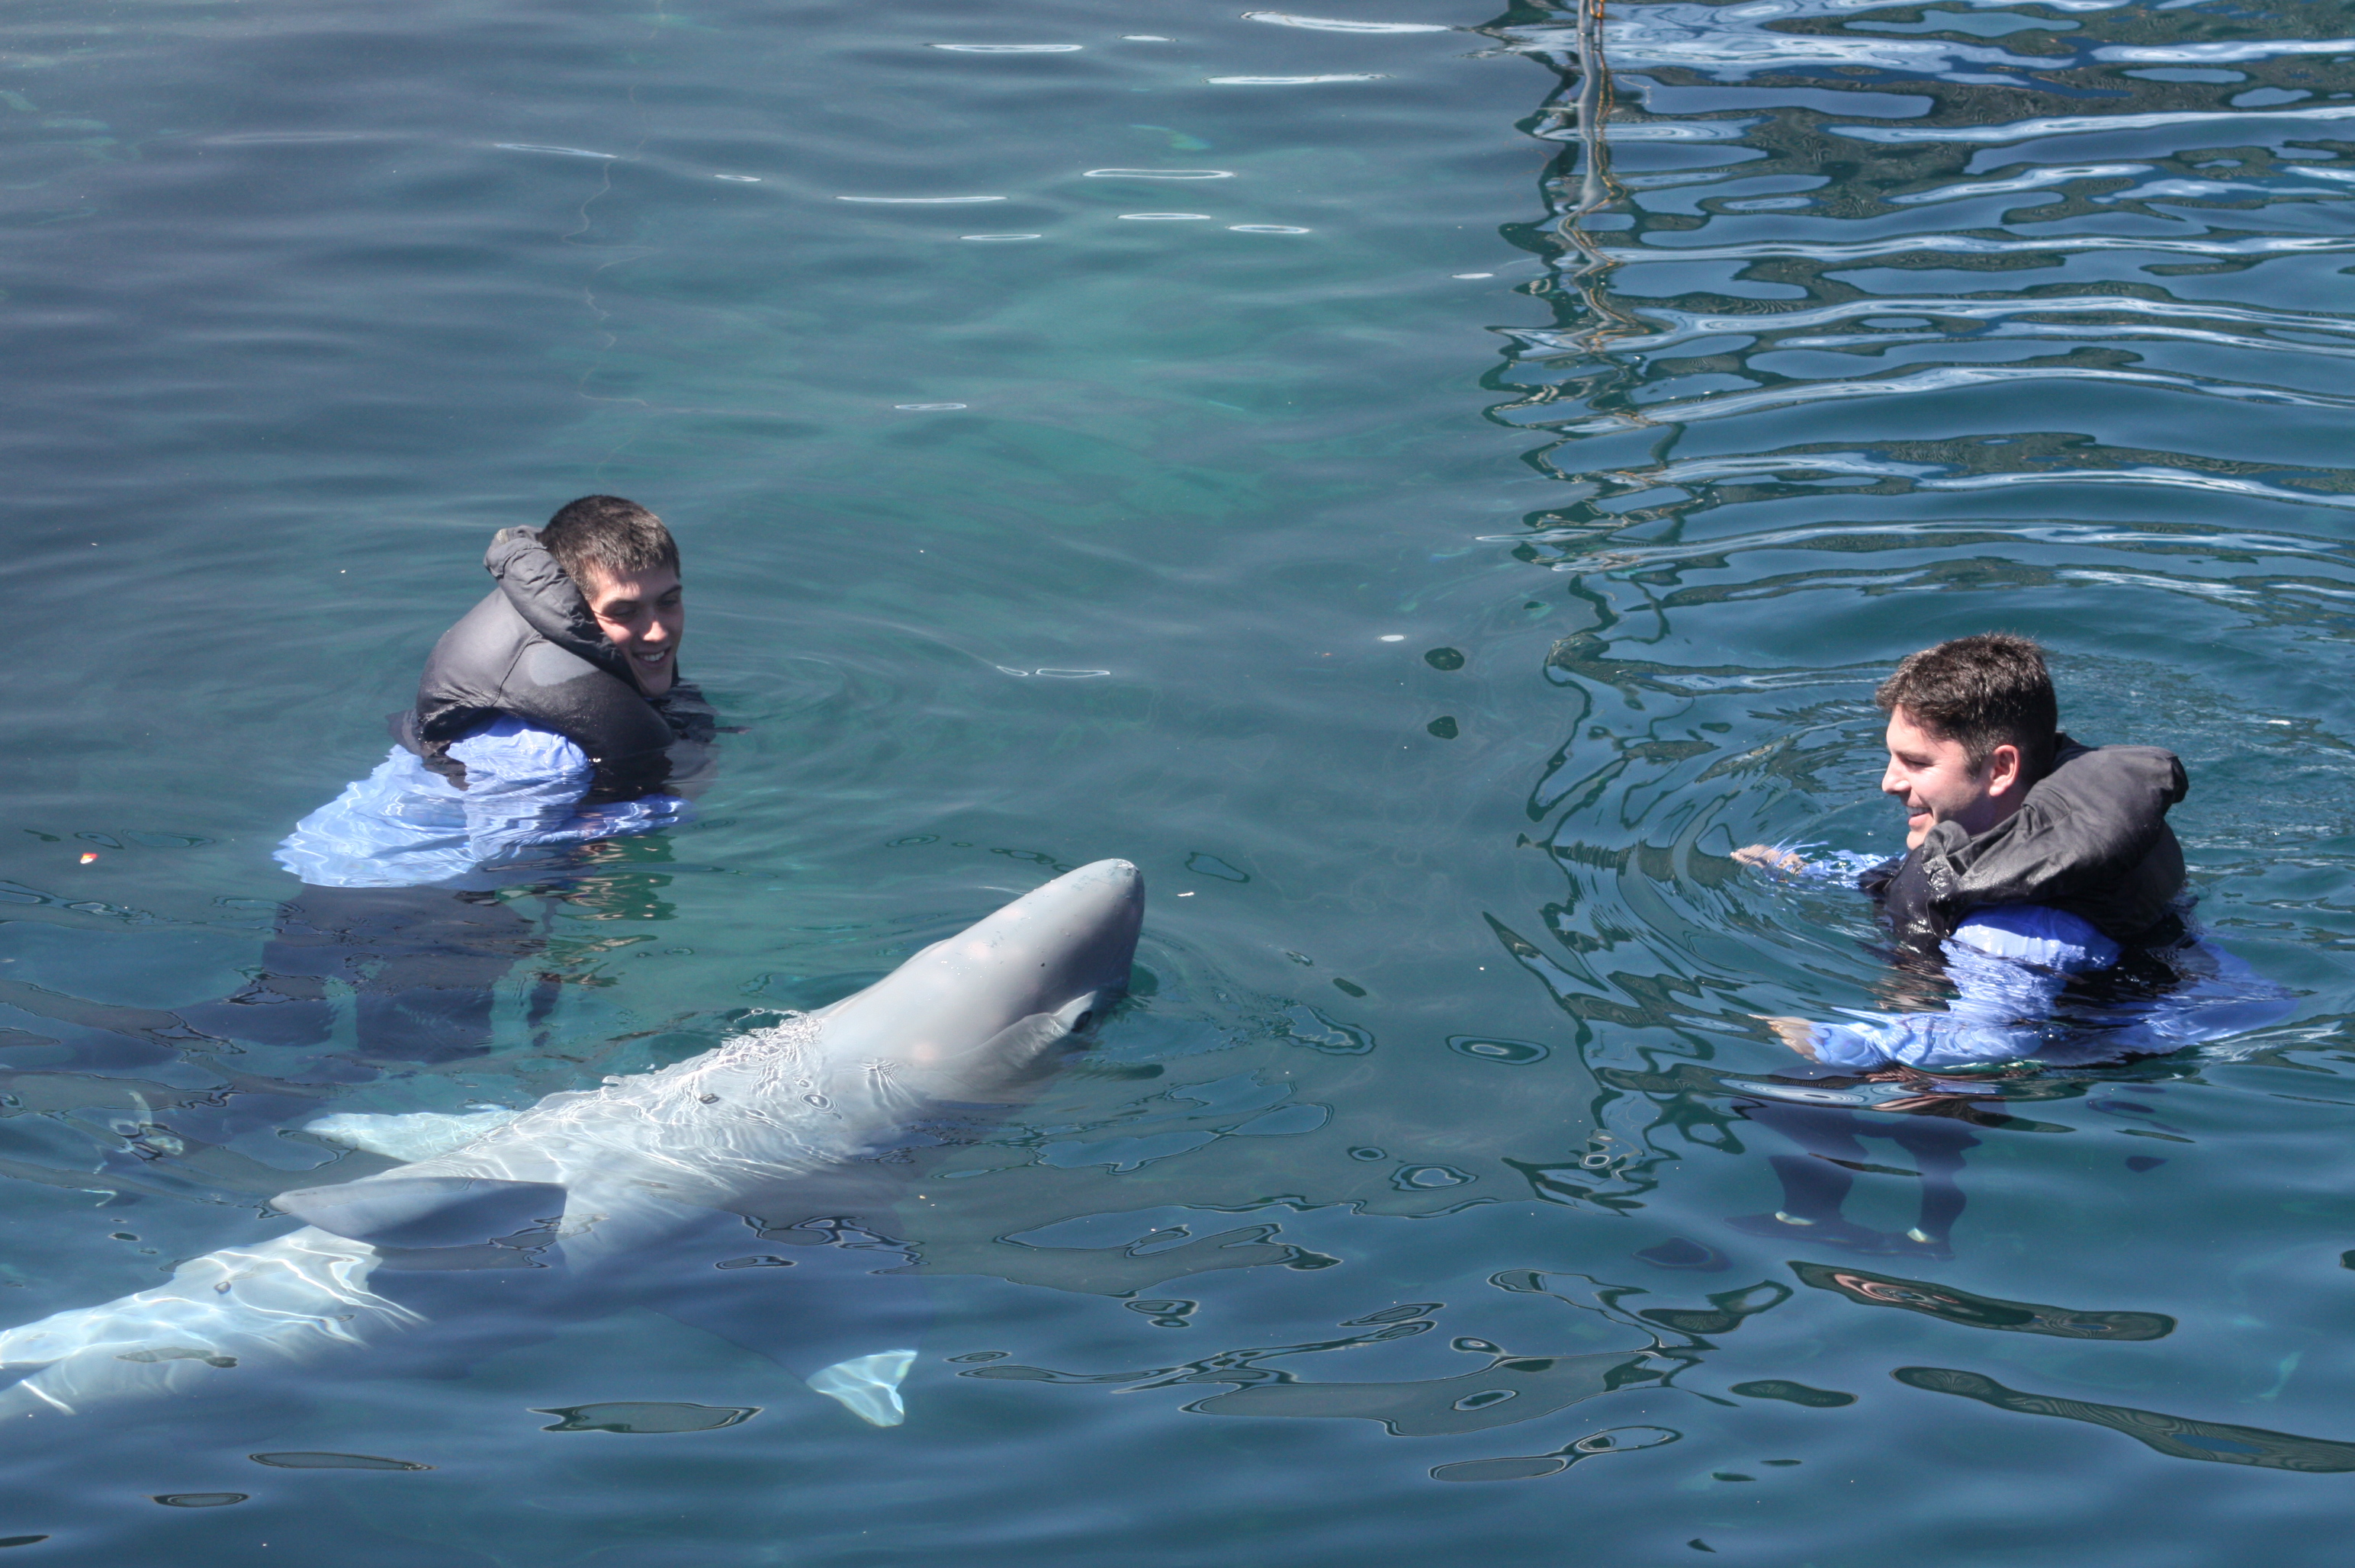 Actors Rich Handley and Kellan Rhude play with Joffrey the fake great white shark in between takes on the set of Indianapolis.